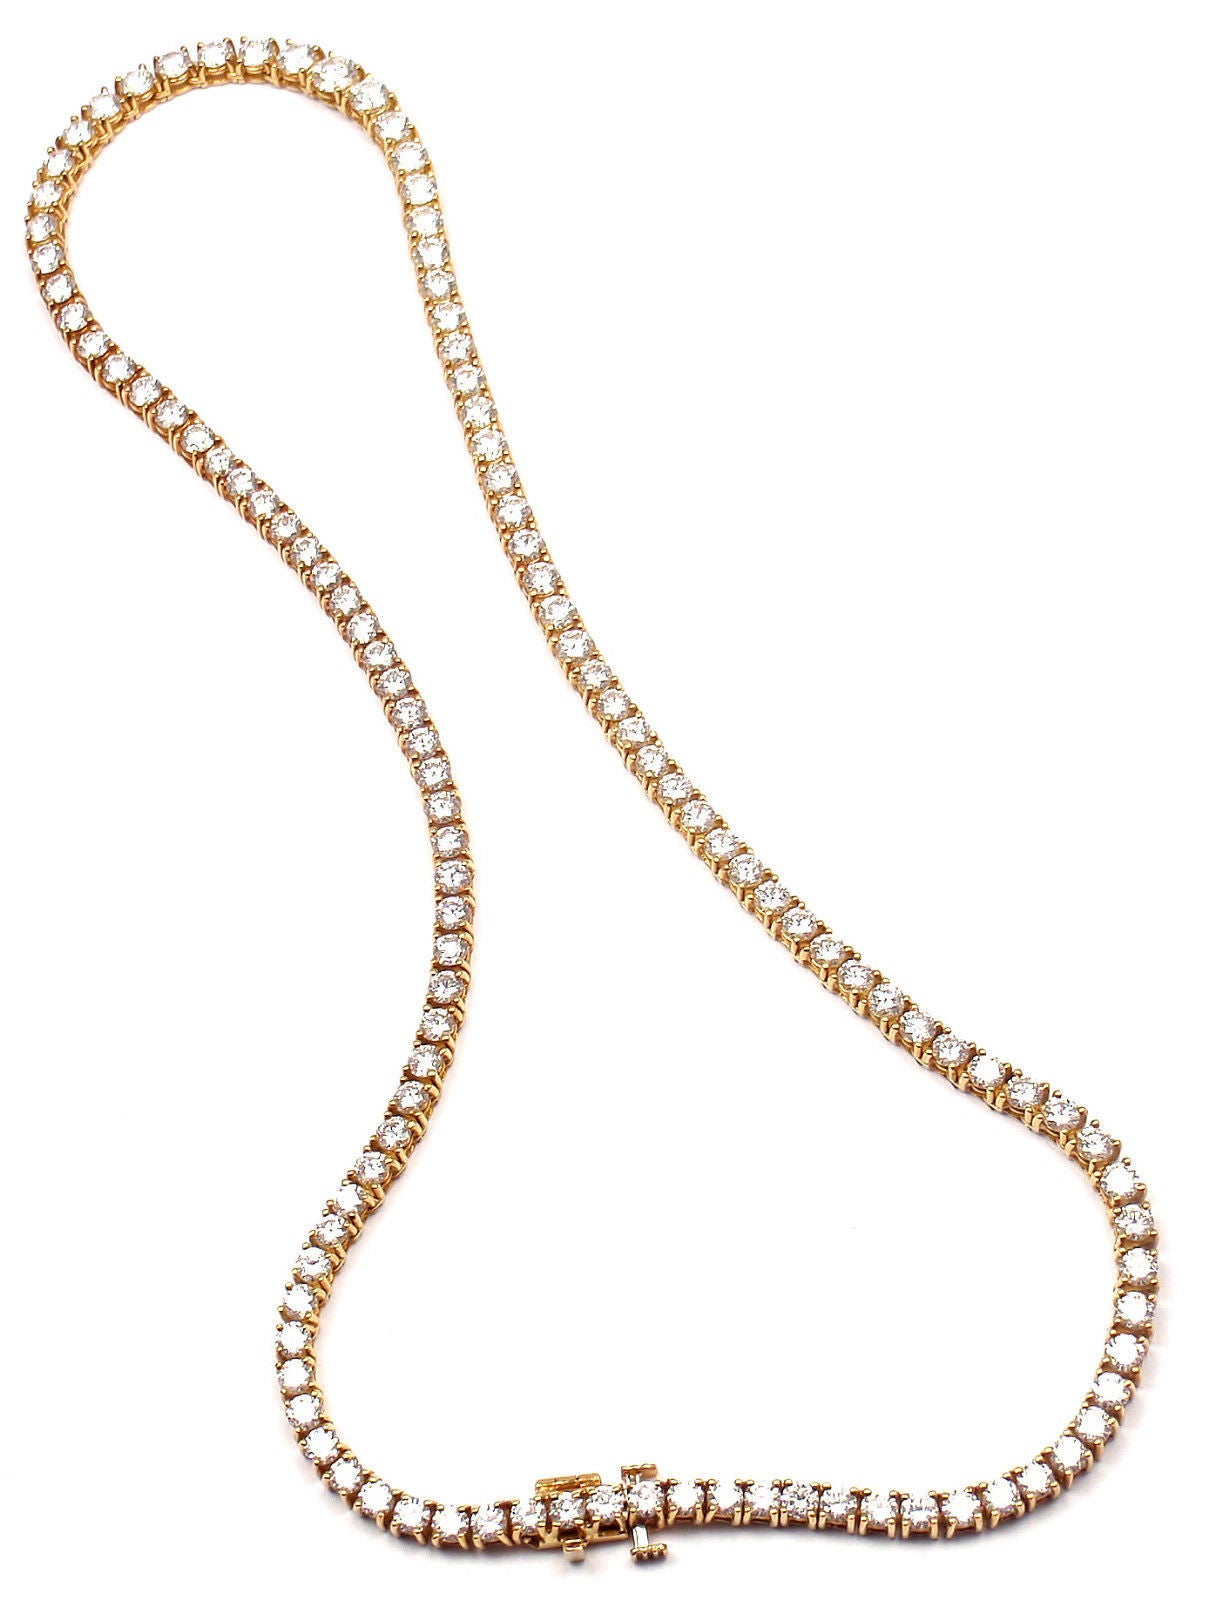 18k Yellow Gold Diamond Tennis Necklace by Tiffany & Co.
With 115 round brilliant cut diamonds VVS-VS clarity,
F-G color 
Total weight approximately 12.38ct
This necklace comes with Tiffany & Co valuation from 1994 for $43,500. 
Today's